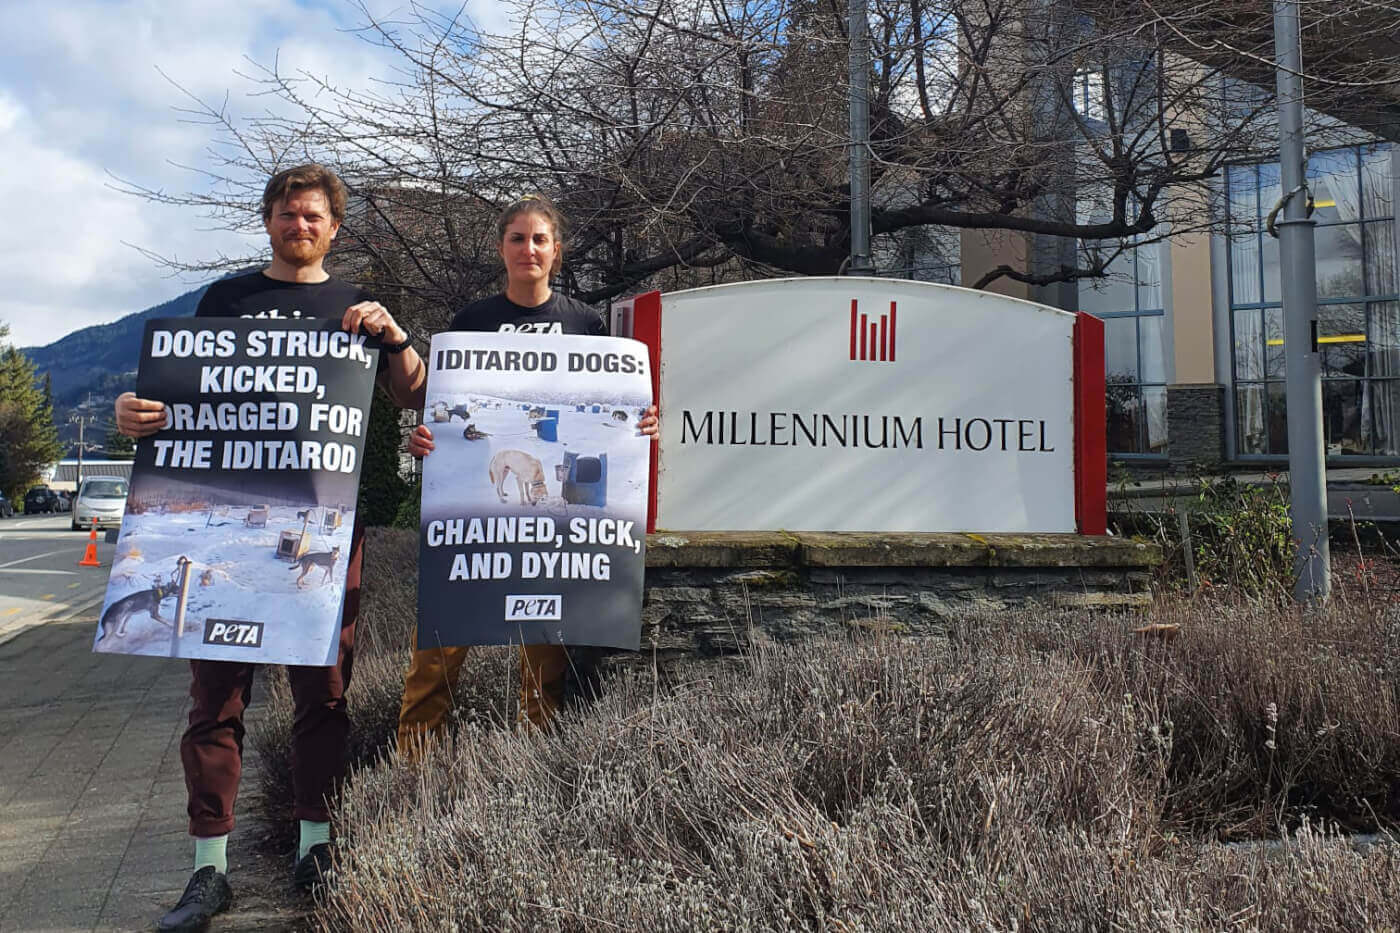 A protest outside Millennium Hotel in Queenstown, New Zealand